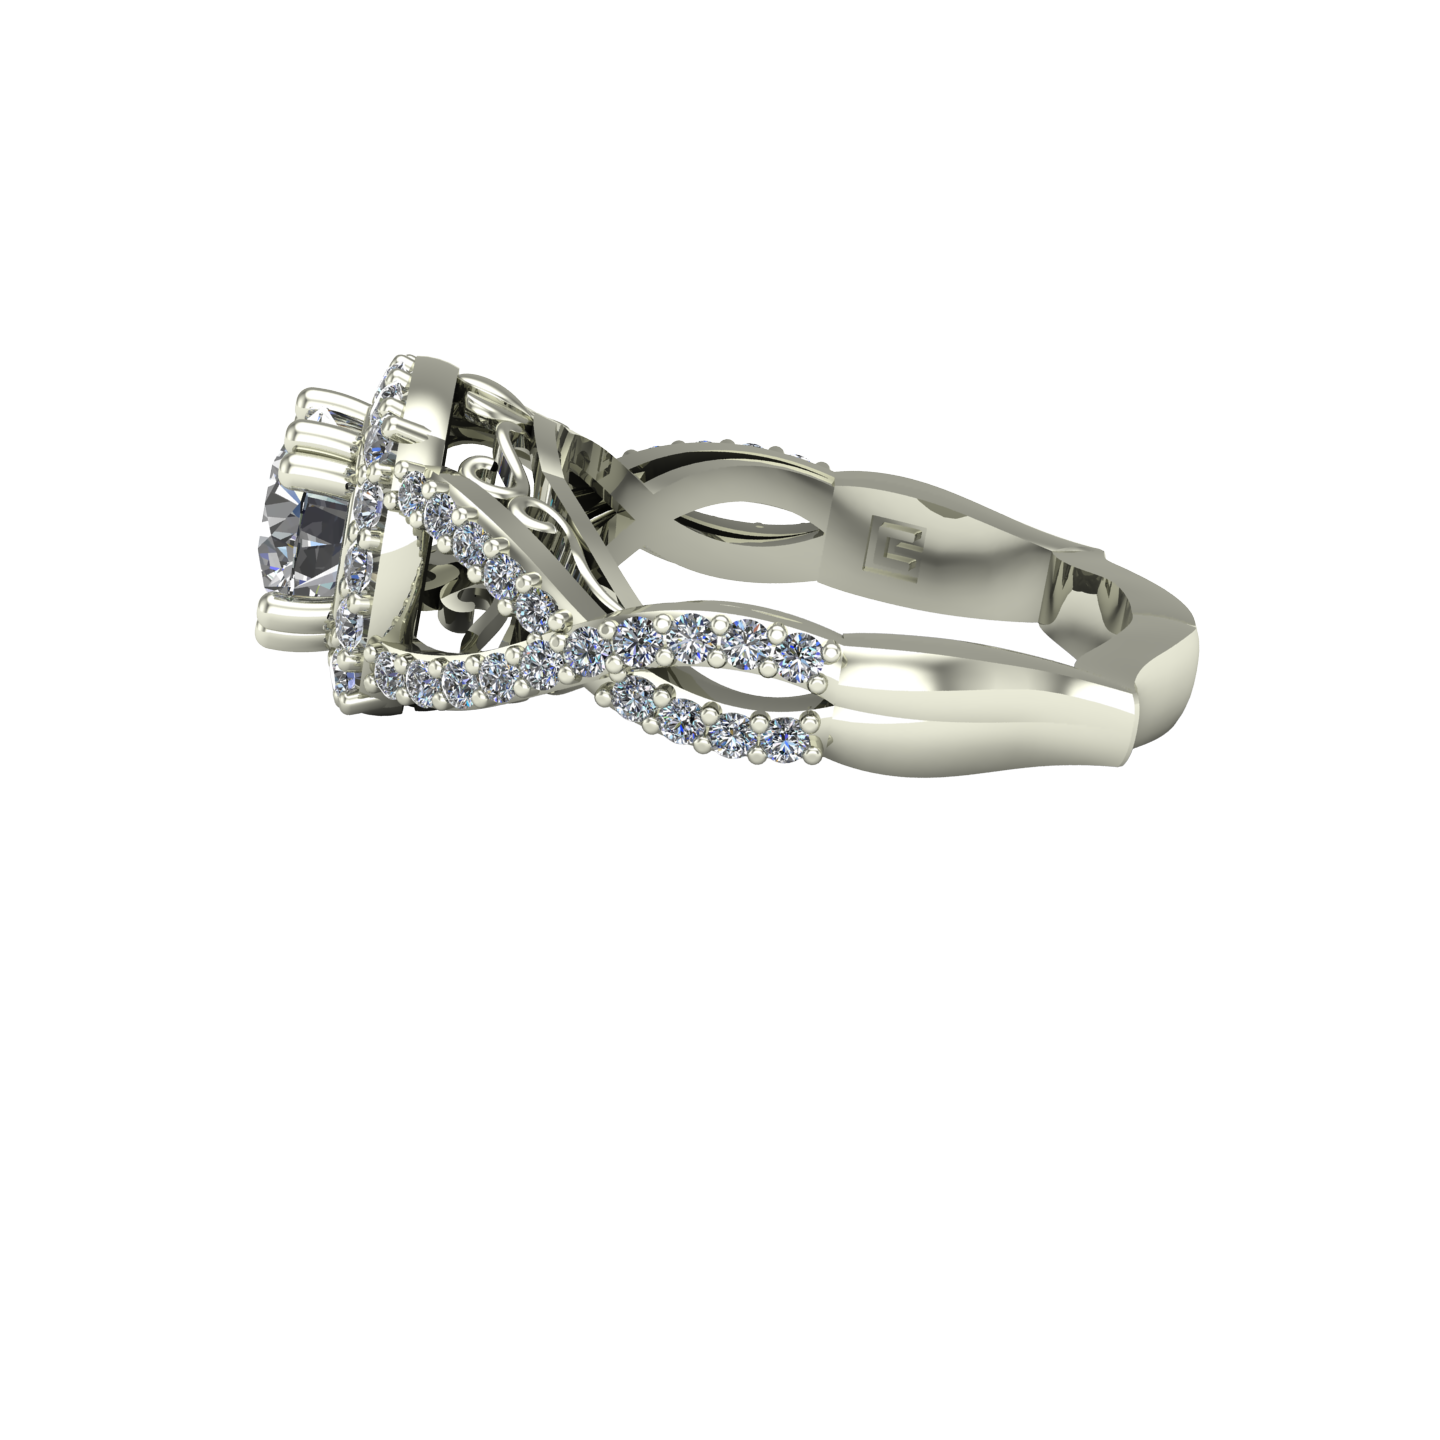 1ct diamond engagement ring cushion halo crossover shank 14k white gold - Charles Babb Designs - side view